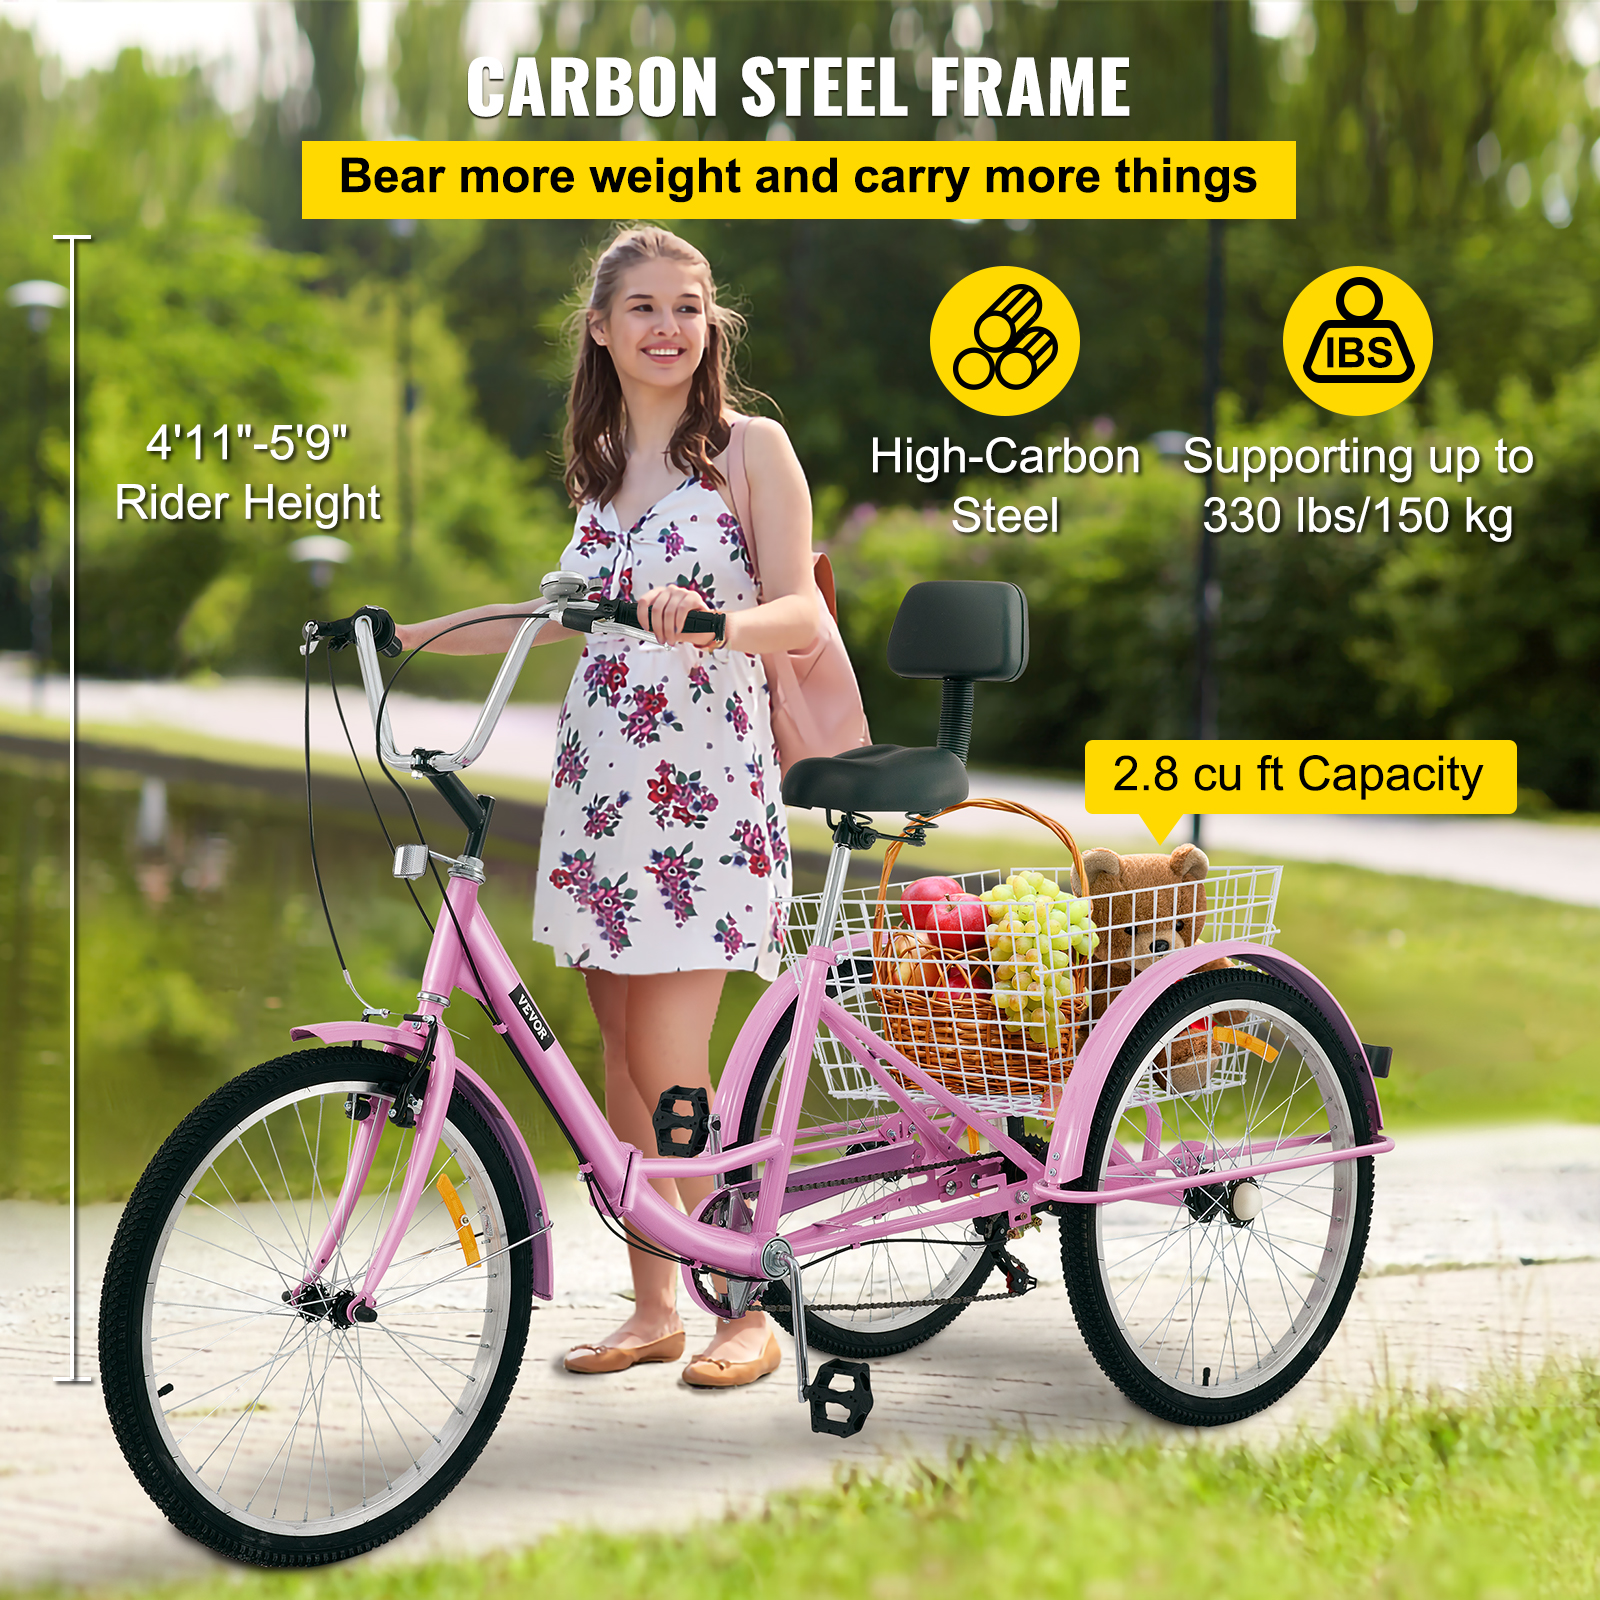 VEVOR Foldable Adult Tricycle 24 Wheels,7-Speed Trike, 3 Wheels Colorful Bike with Basket, Portable and Foldable Bicycle for Adults Exercise Shopping Picnic Outdoor Activities,Pink - image 3 of 9